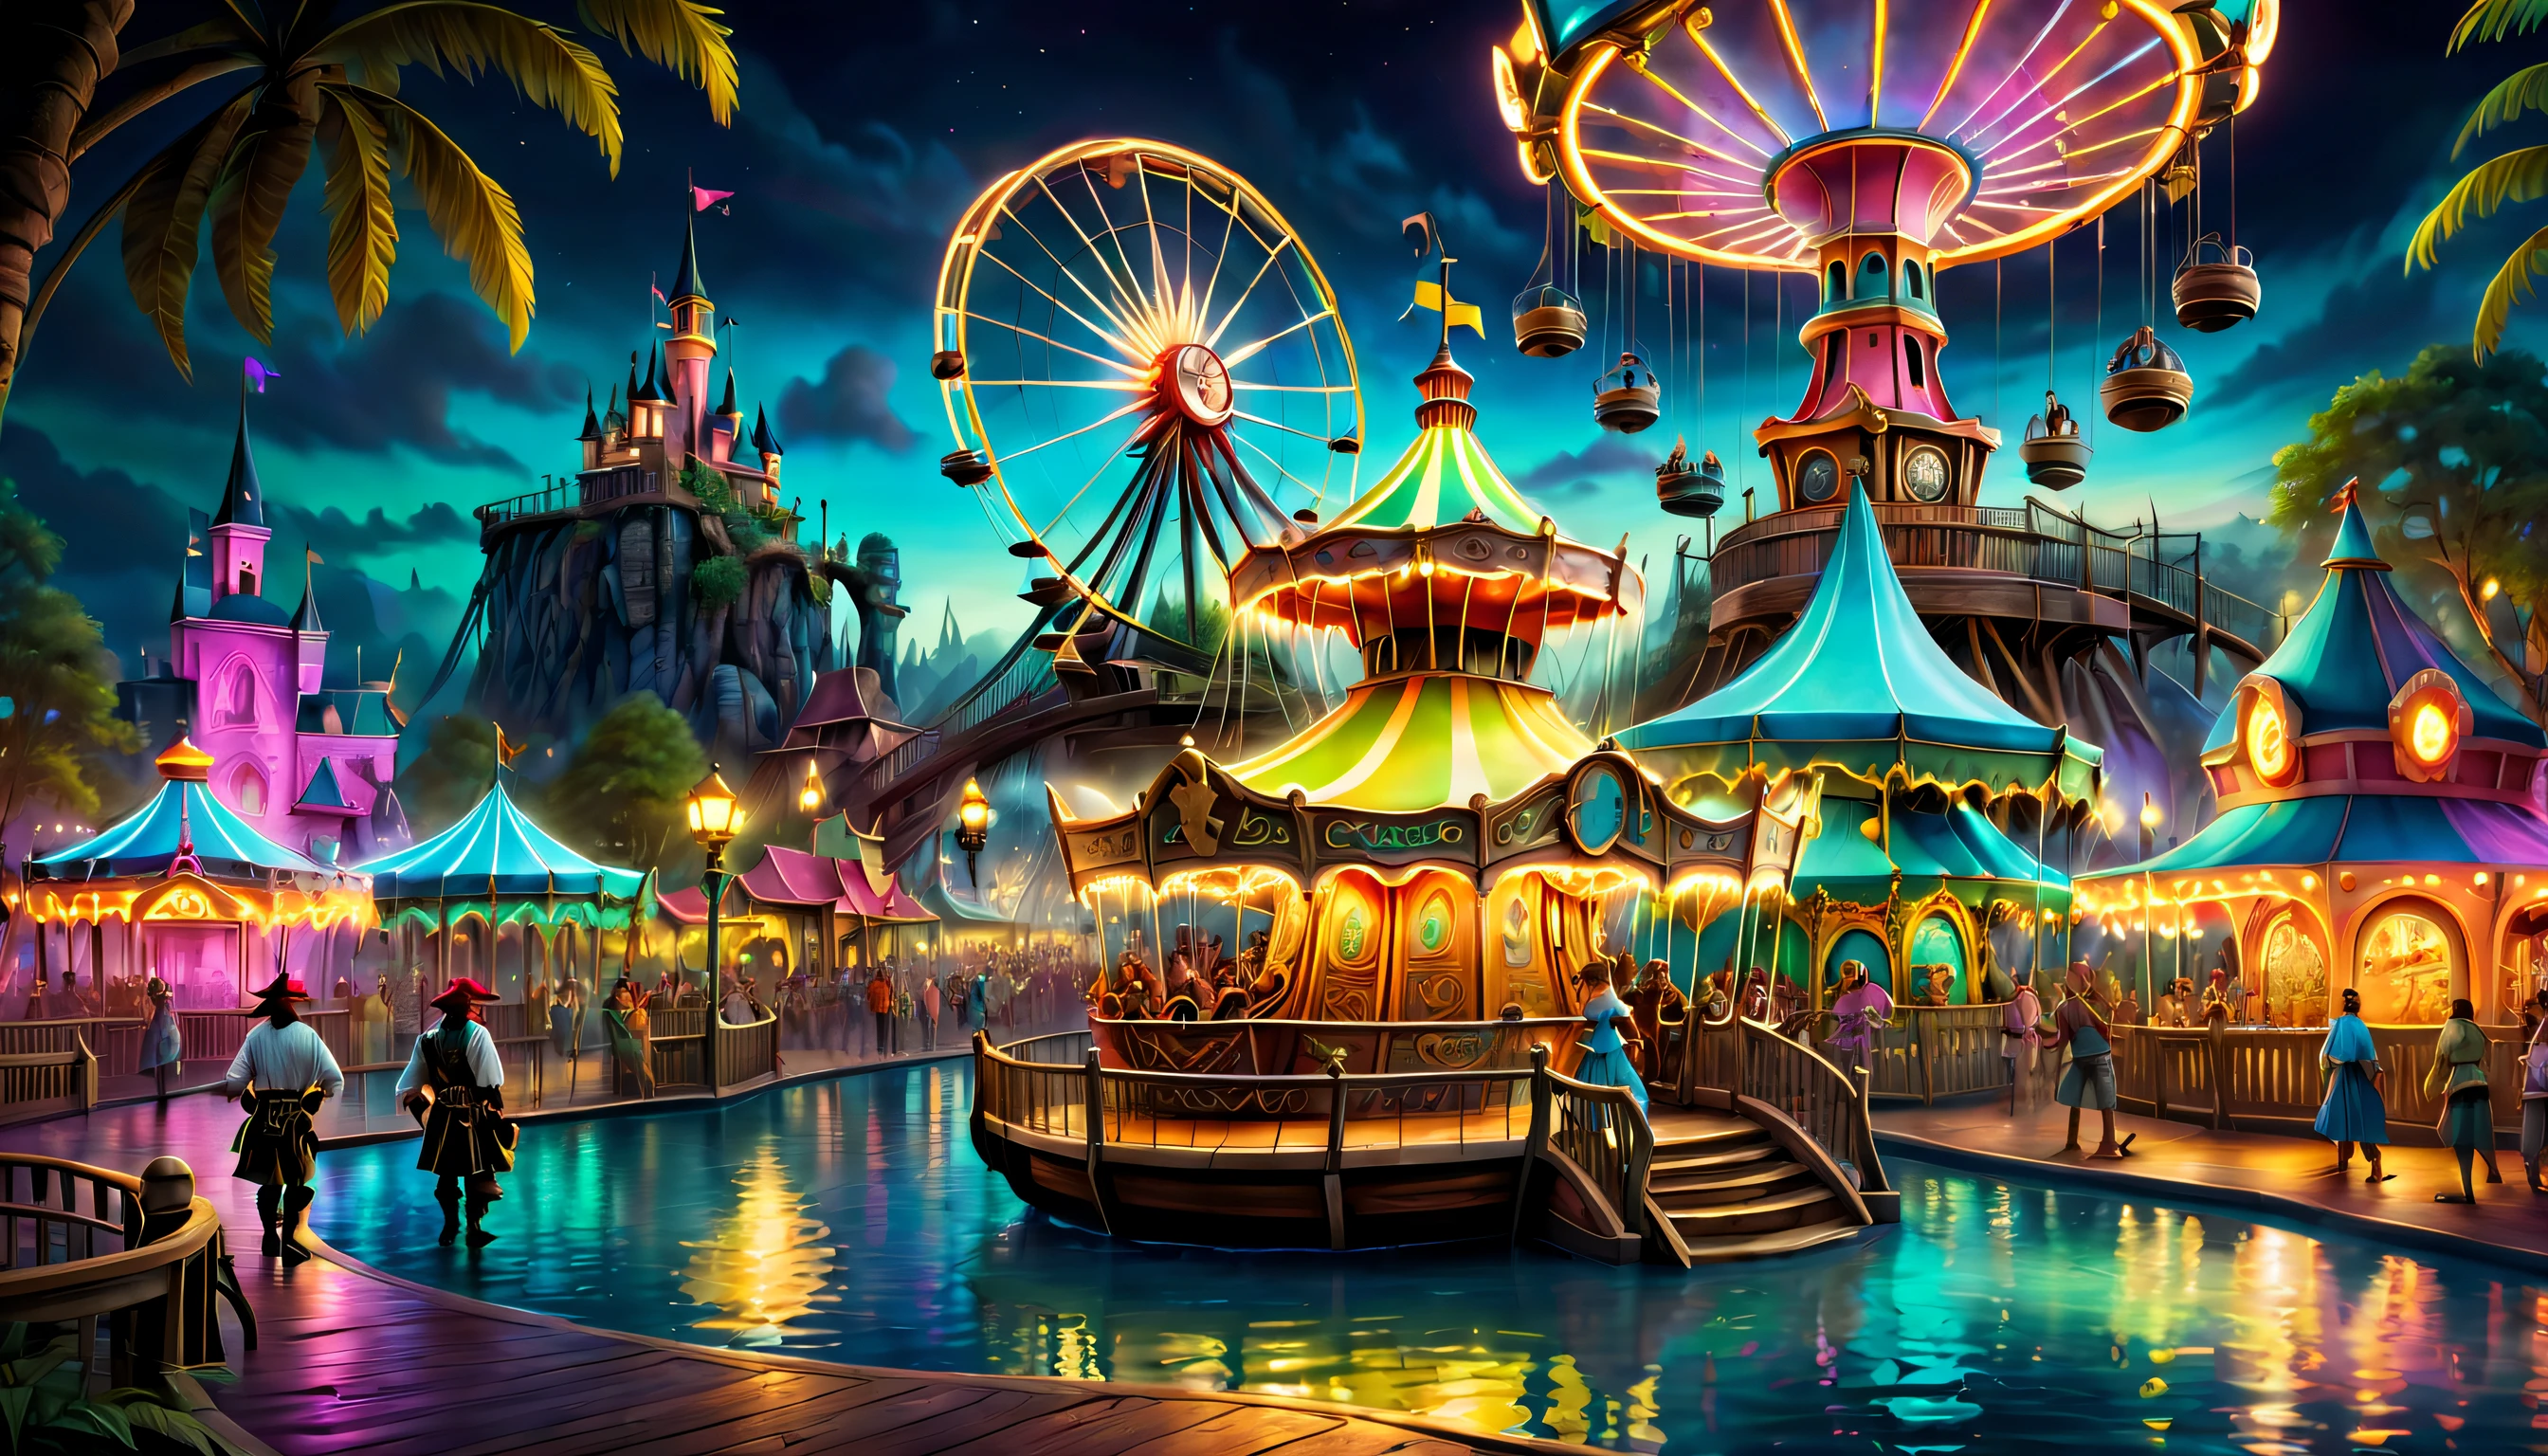 (Best quality at best, 8K, A high resolution, tmasterpiece:1.2), ultra - detailed, (actual, realistically, realistically:1.37), vibrant with colors, magical ambiance, Whimsical, ((disney pirate theme park, pirates of the caribbean，fountain and carousel, Lively Pirate Town Park, Beautiful fairytale neon colors, Medieval Fantasy Town Theme Park, Magical neon colors and atmosphere, concept art magical highlight, magical concept art, Fantasy style, Magical fantasy，The is very detailed, disney theme park, magical colors and atmosphere, An amusement park, roller coasters, pirate ships, bumper cars, Ferris wheel, waterpark)), Surreal, Psychedelic, Complicated details, Beautiful texture, Ethereal, like a dream, Soft glowing light, Charming Patterns, fantastical creature, Hidden surprises, dreamlike landscapes, Surreal color palette, Mystic aura, ultra-realistic realism, Enchanting journey, psychedelic trip, vivid imagination, immersive experience, mysterious creature, otherworldly charm, glowing paths, Light up the Magic Theme Park, surreal sky, Whimsical theme park, a magical encounter,Fascinating artwork